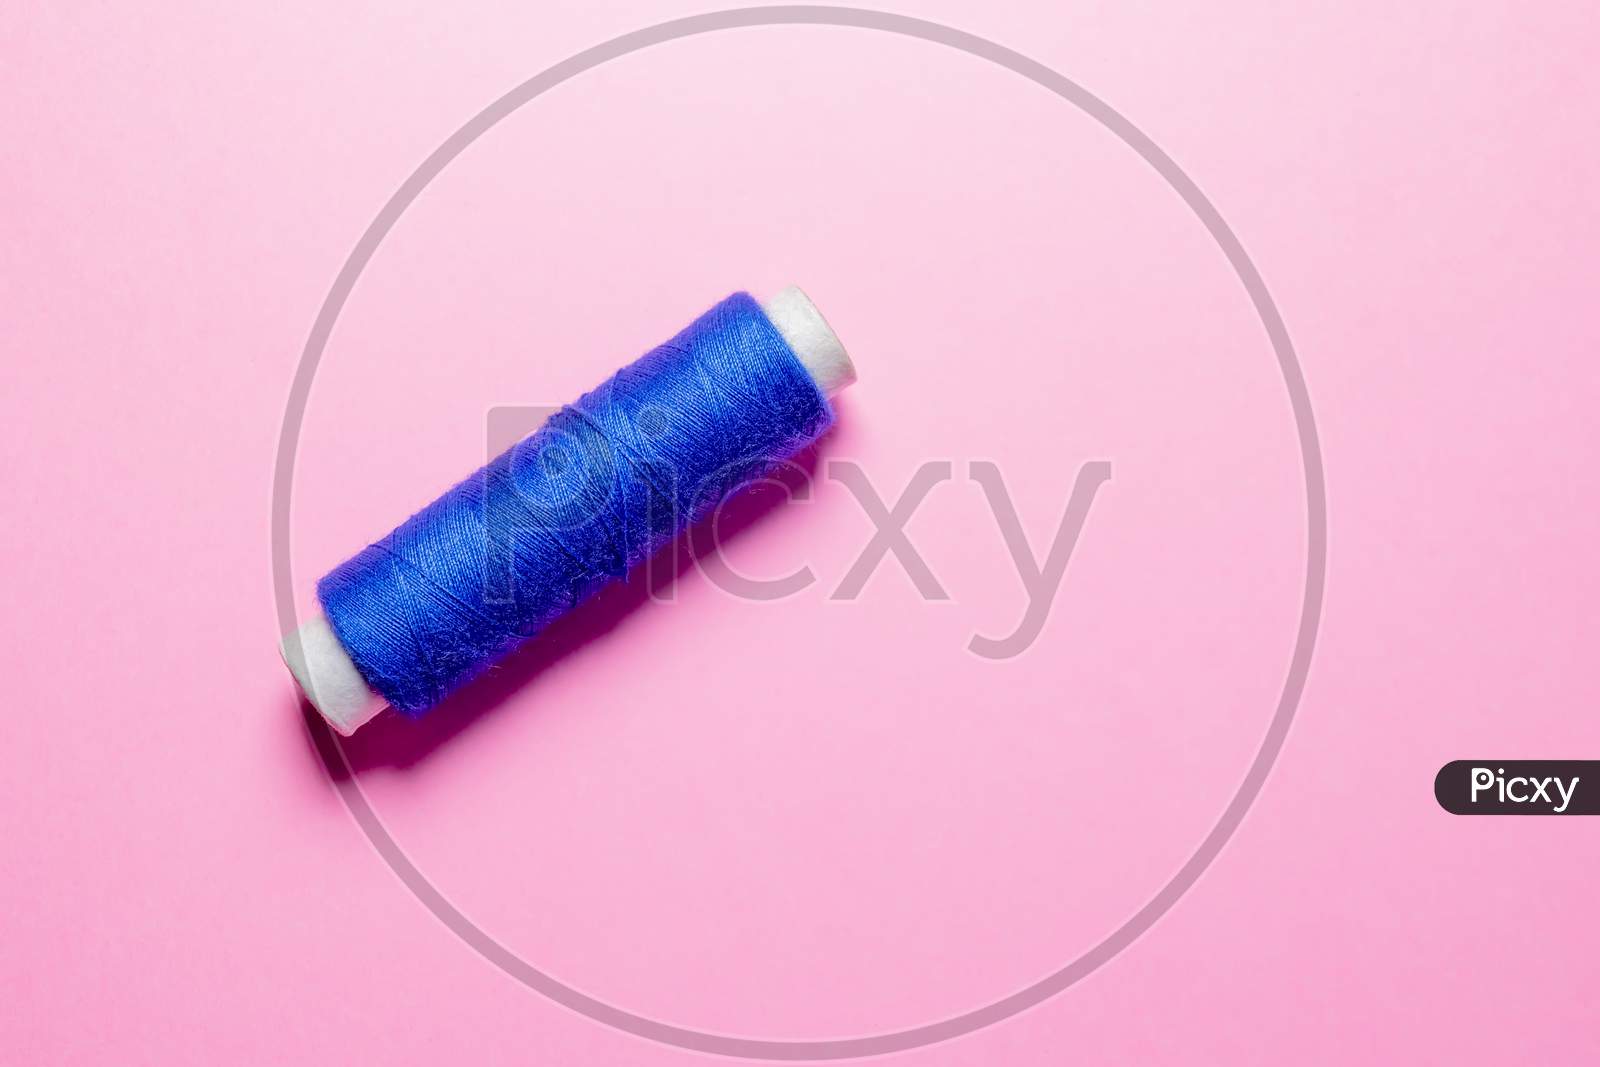 Sewing Machine Thread Reel Of Blue Color On Pink Background With Selective Focus.